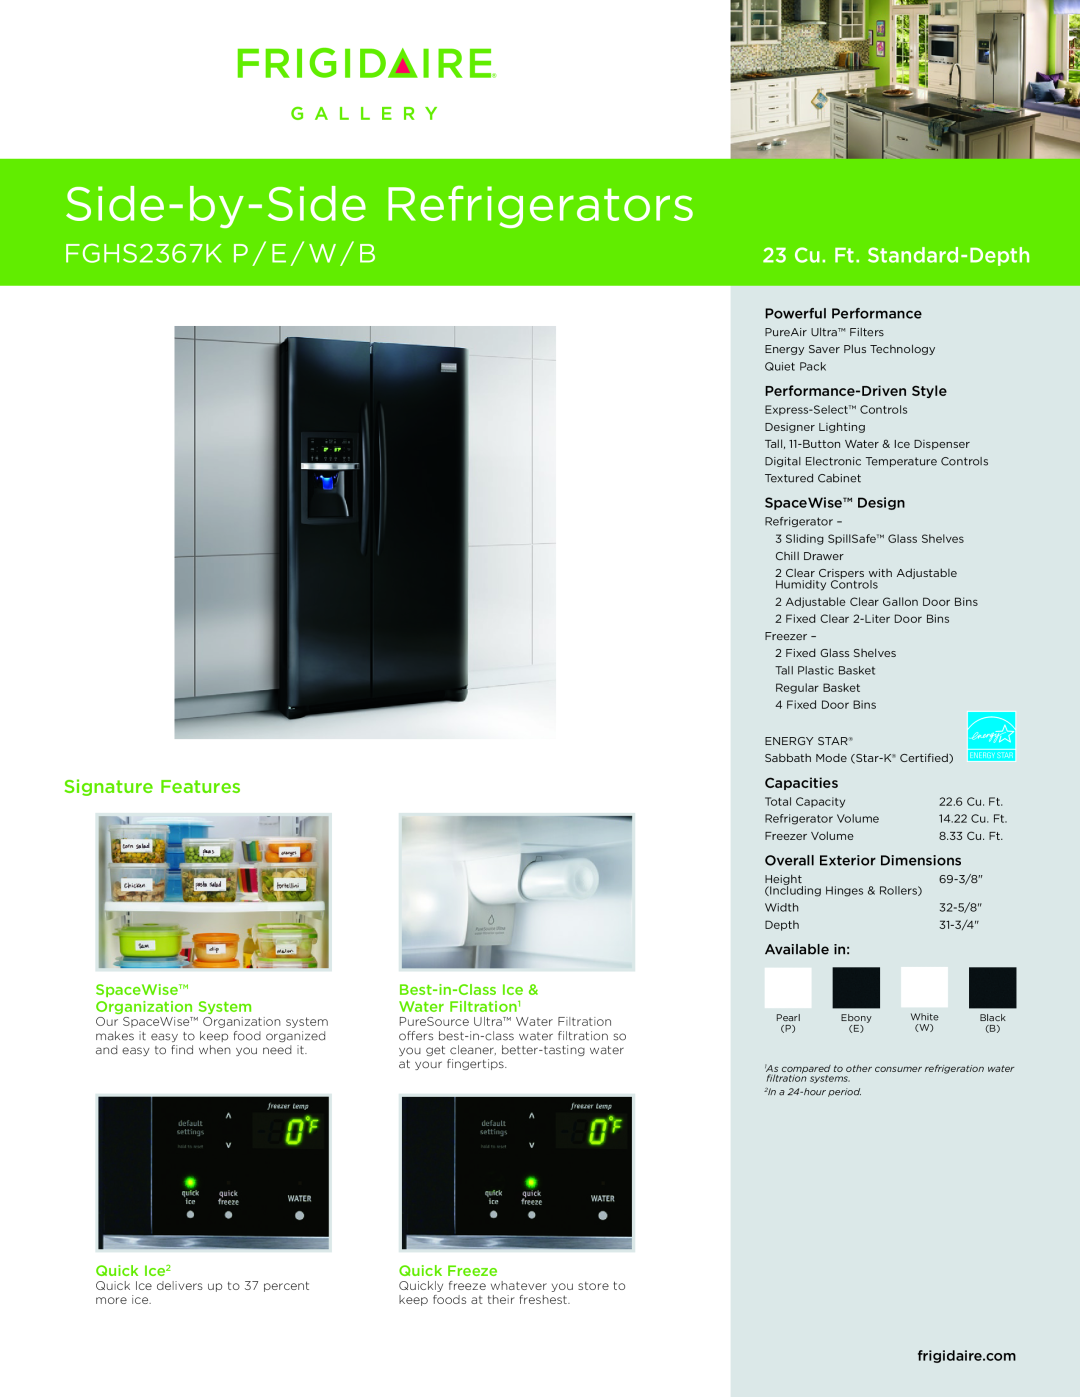 Frigidaire FGHS2367K dimensions SpaceWise, Best-in-ClassIce, Organization System, Water Filtration1, Quick Ice2 